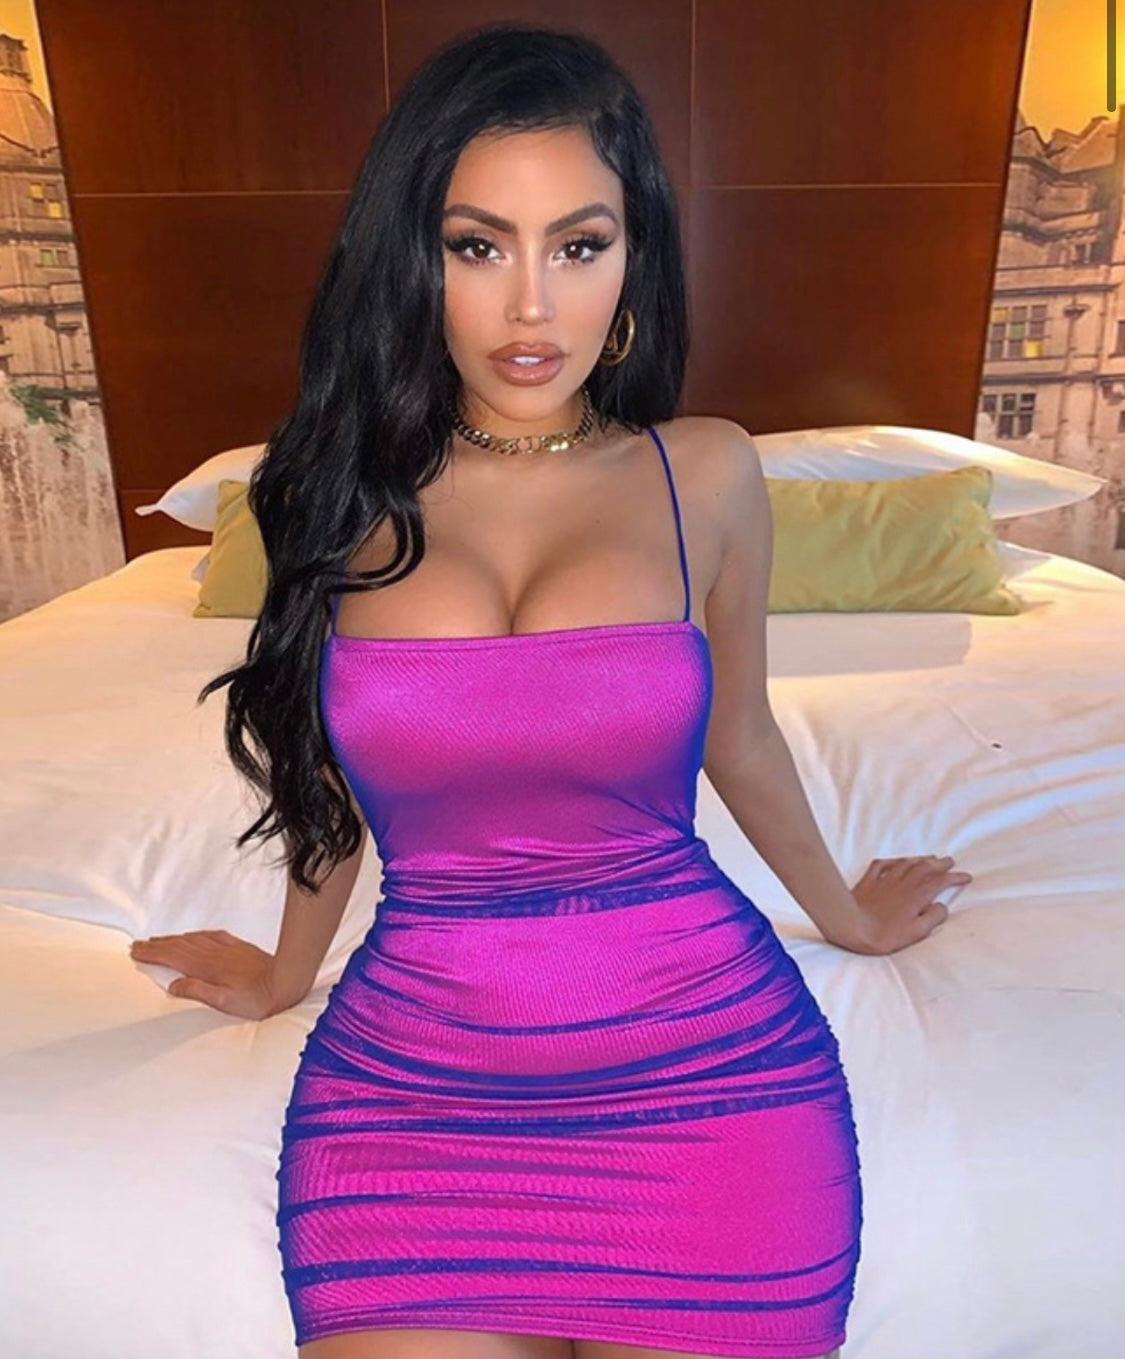 Ombre Sling Bodycon Dress